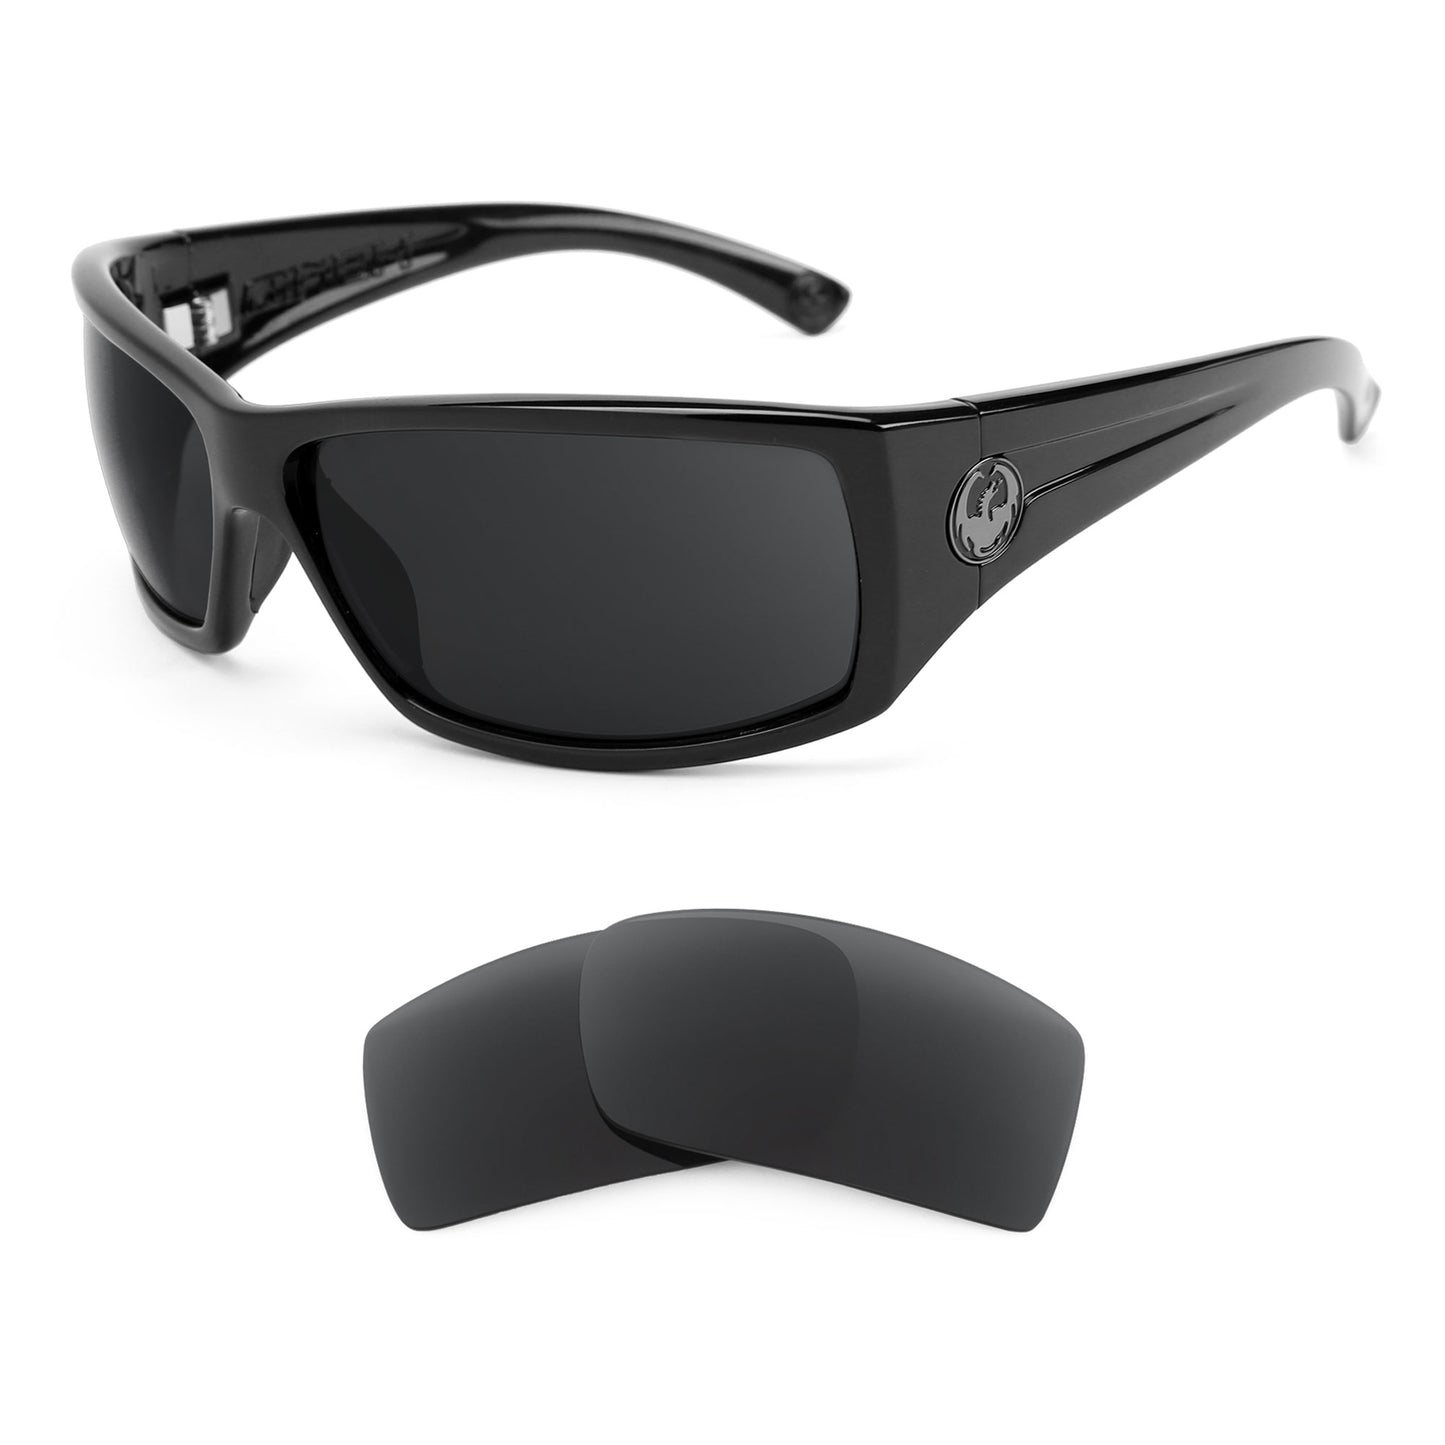 Dragon Cinch sunglasses with replacement lenses